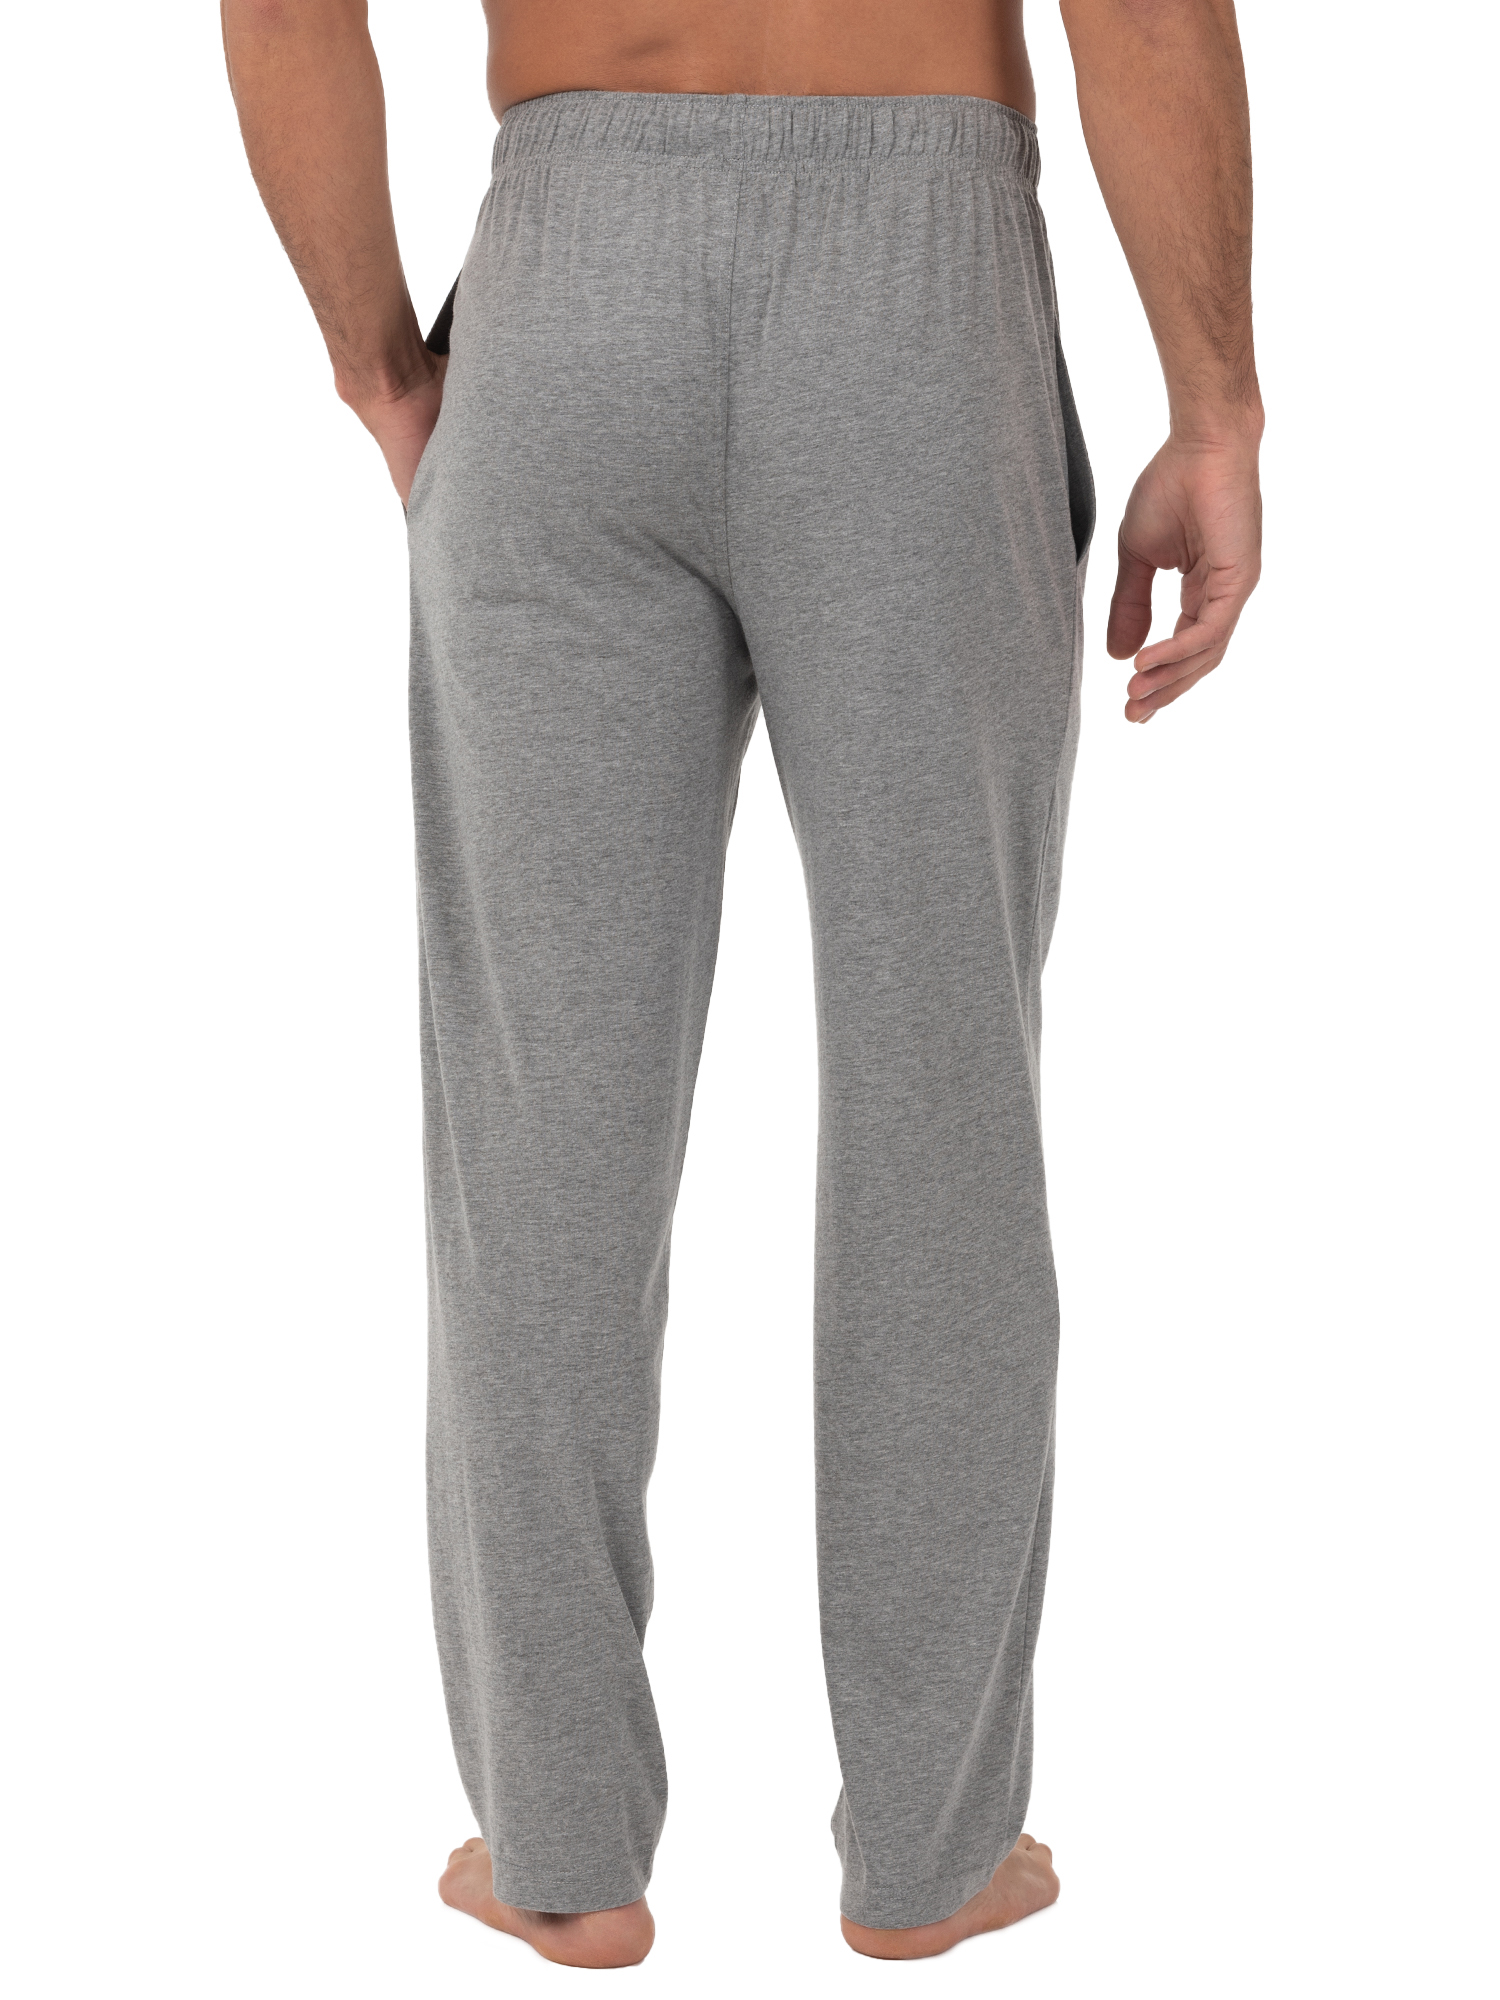 Fruit of the Loom Men's and Big Men's Jersey Knit Pajama Pants, Sizes S-6XL - image 6 of 9